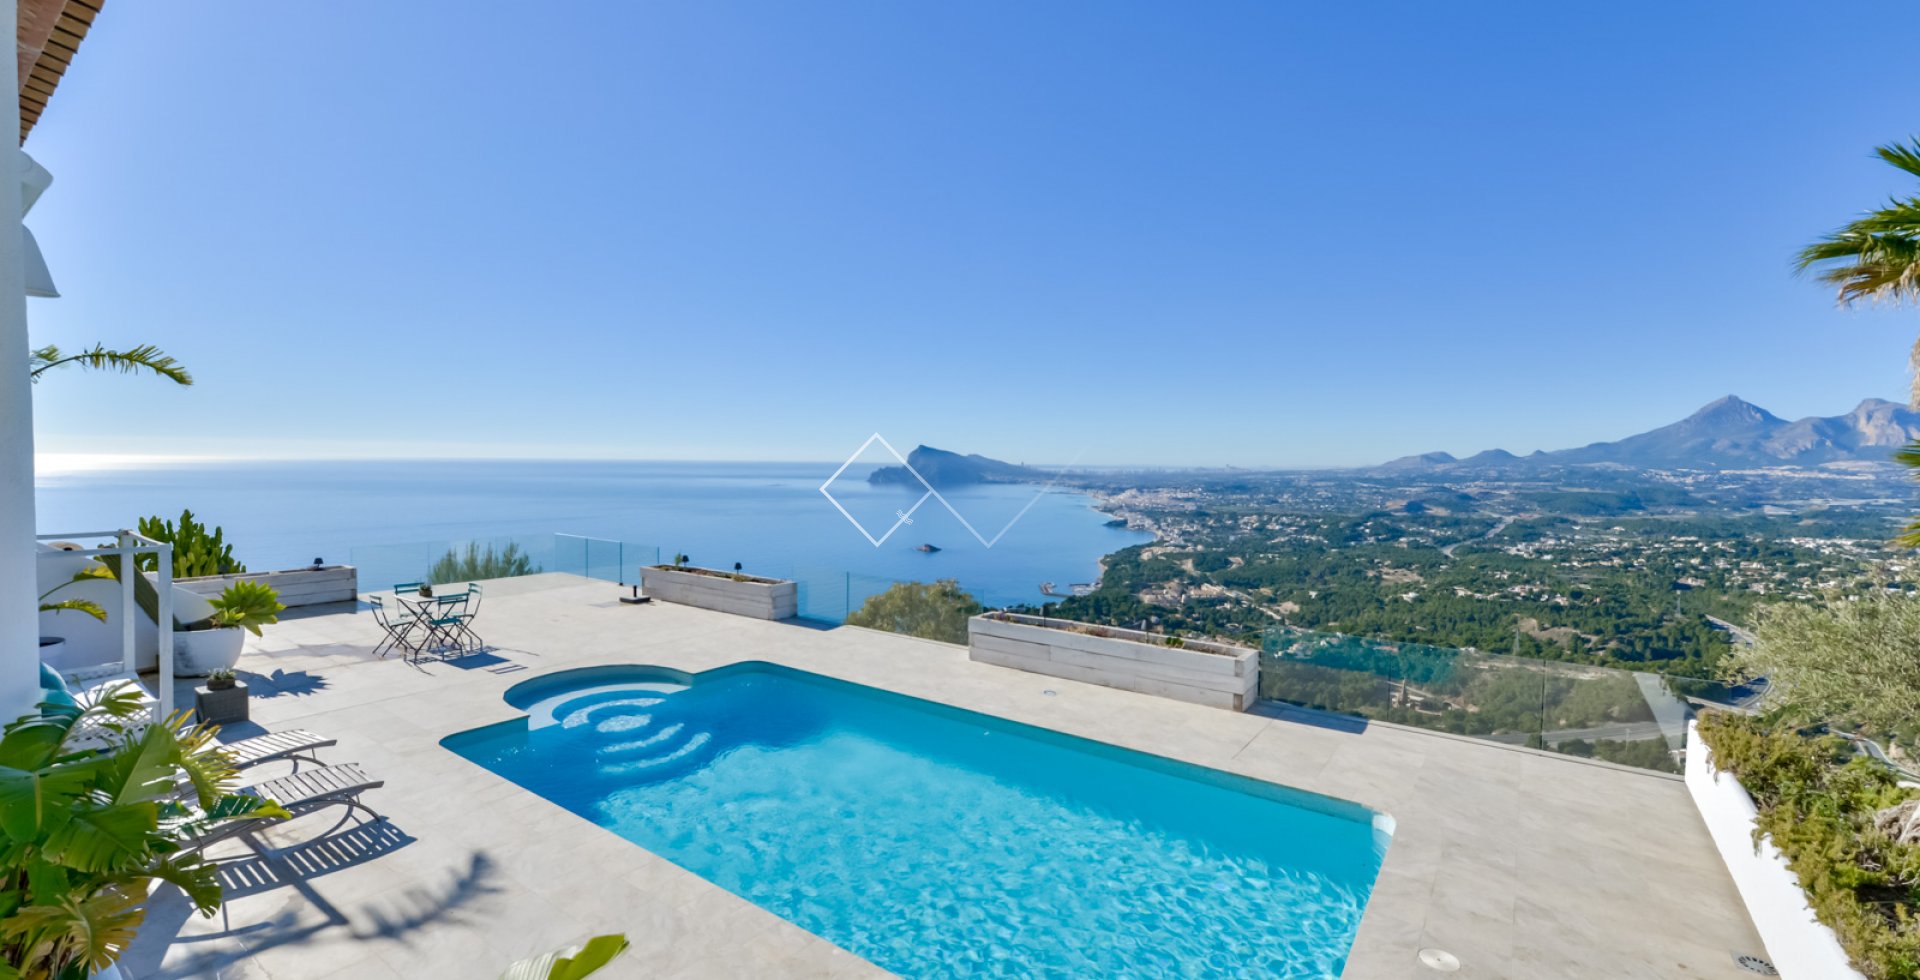 sea views - Beautifully styled villa with superb sea views for sale in Altea Hills